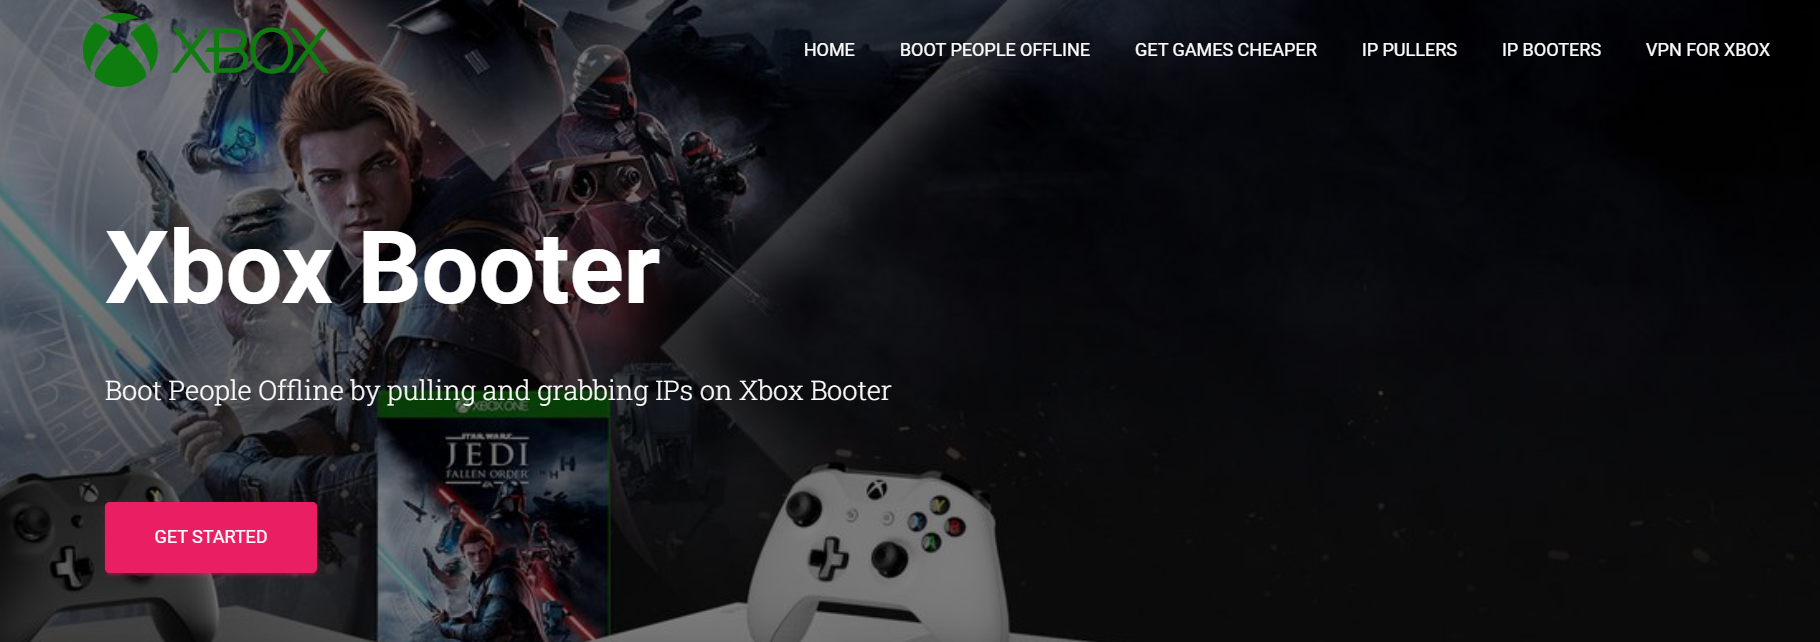 Xbox One Booter: